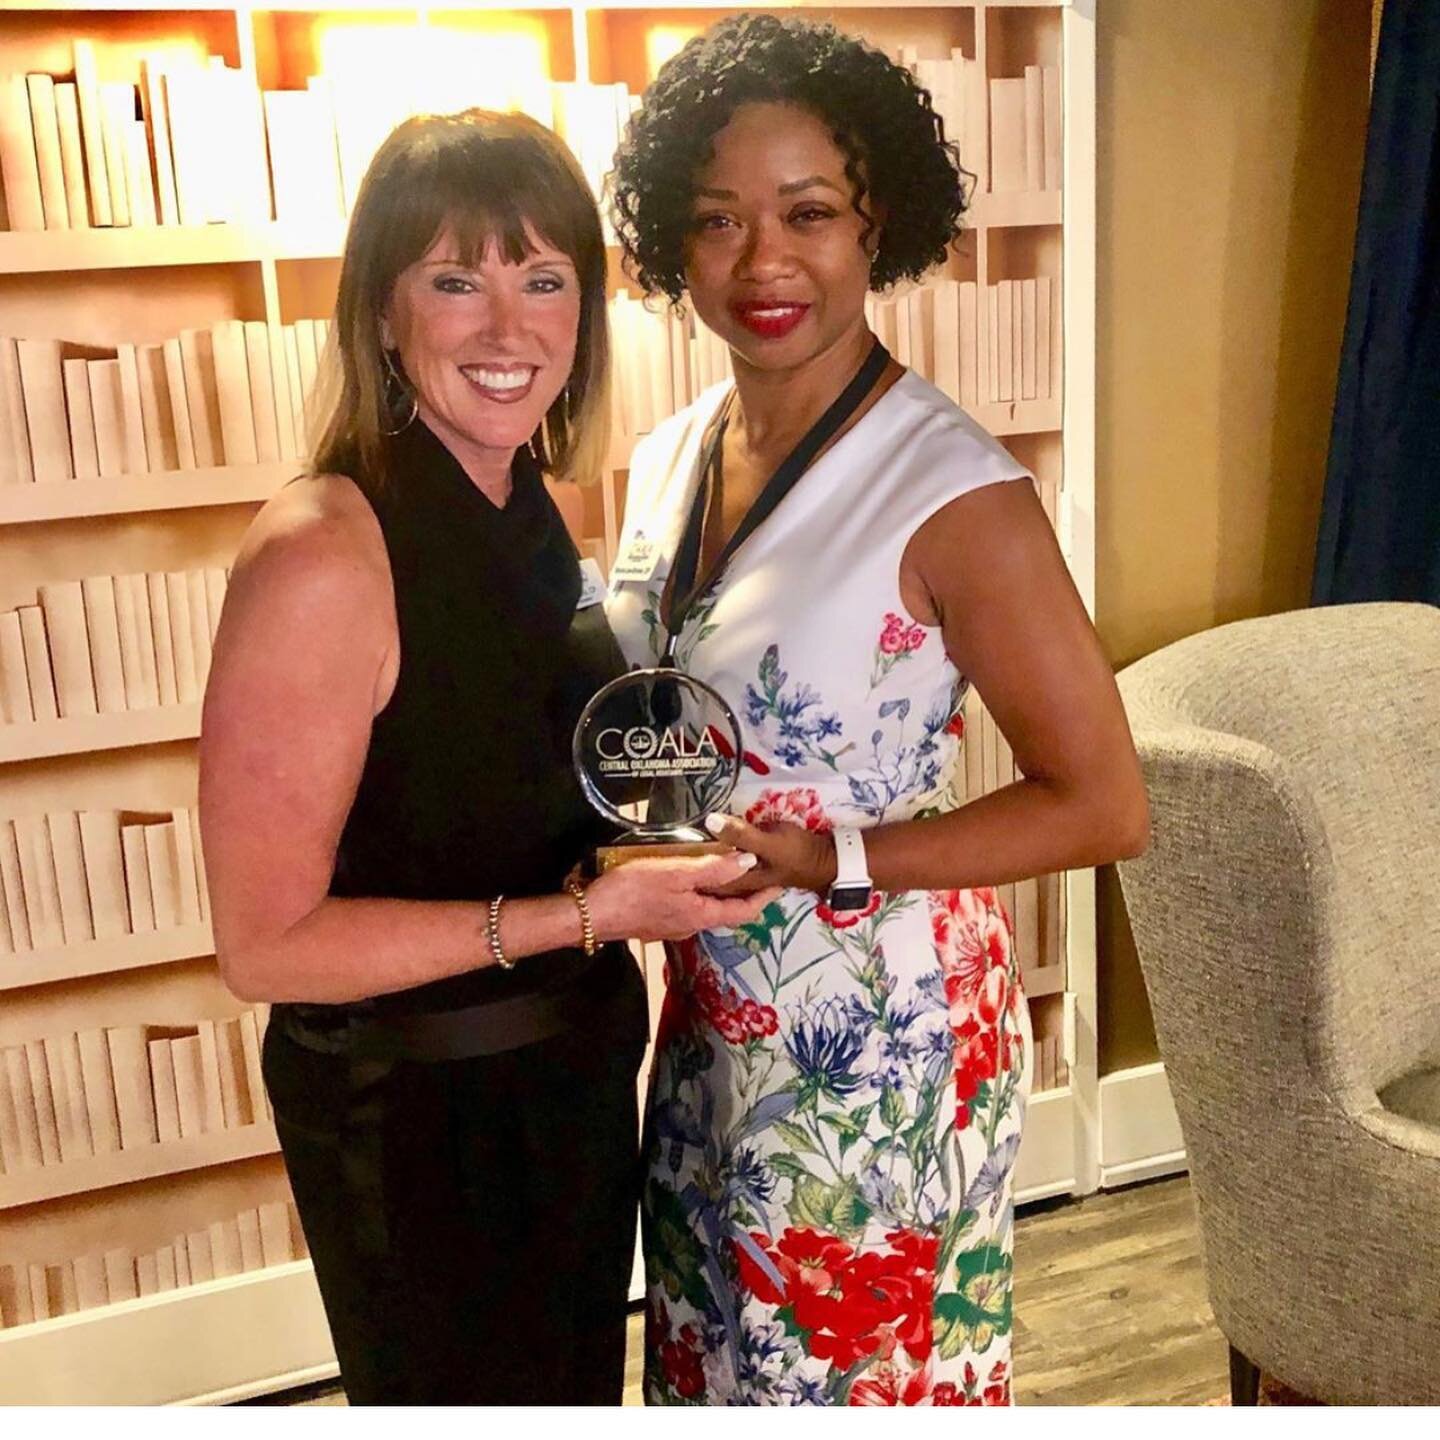 COALA would like to congratulate our 2019 Paralegal of the Year, Tamira Lee-Brown. It is hard to think of a more deserving member of our community!  CONGRATULATIONS @shealeebrown